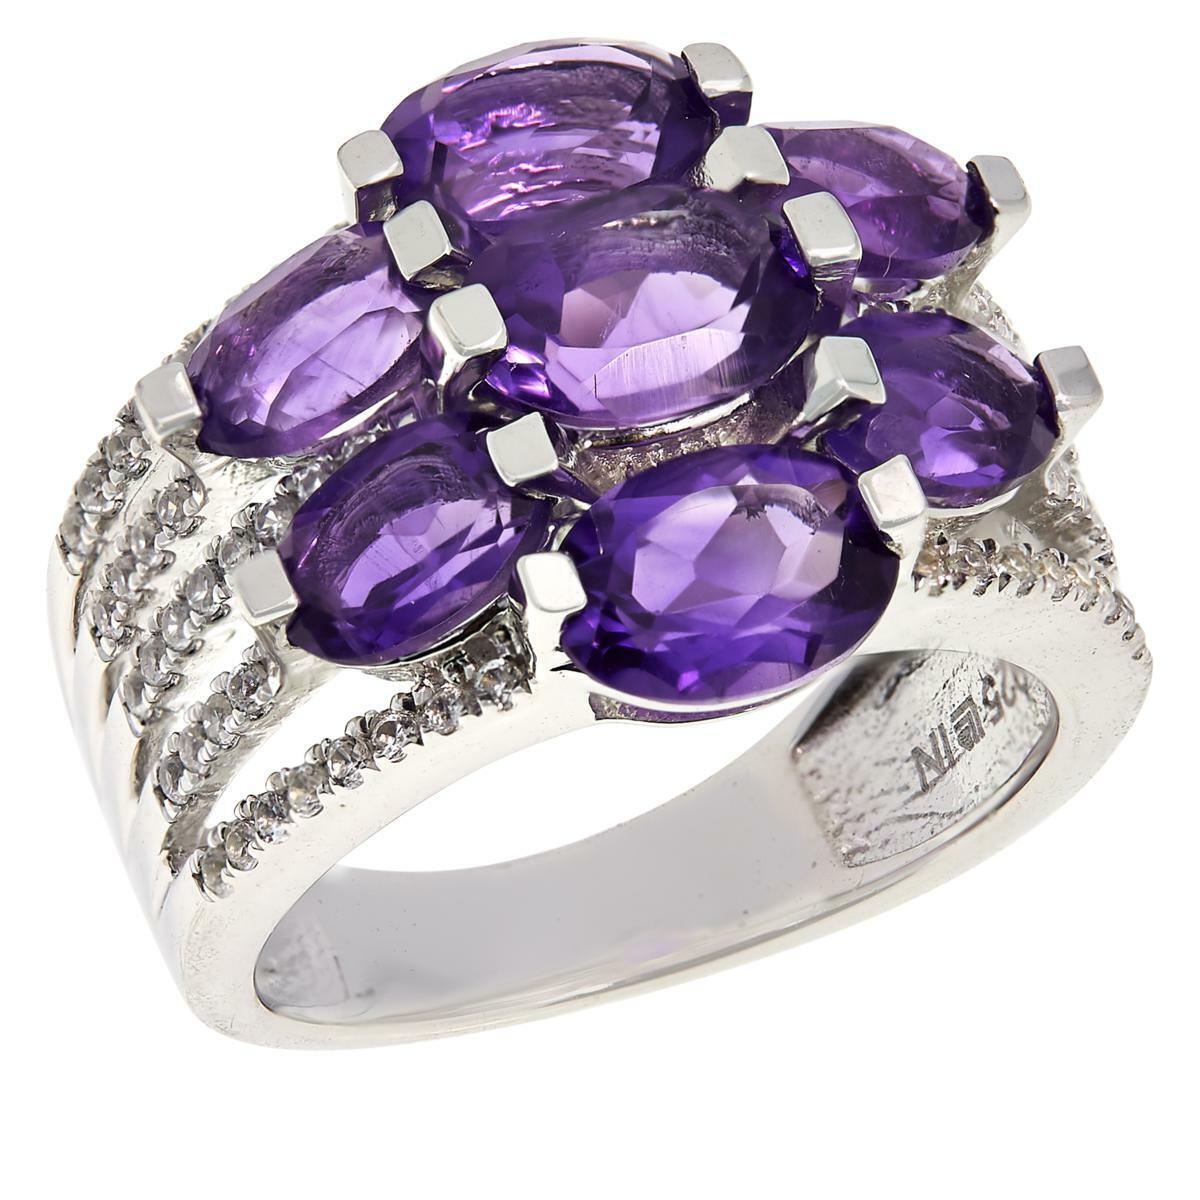 Colleen Lopez Oval Amethyst and White Zircon 7-Stone Ring, Size 5